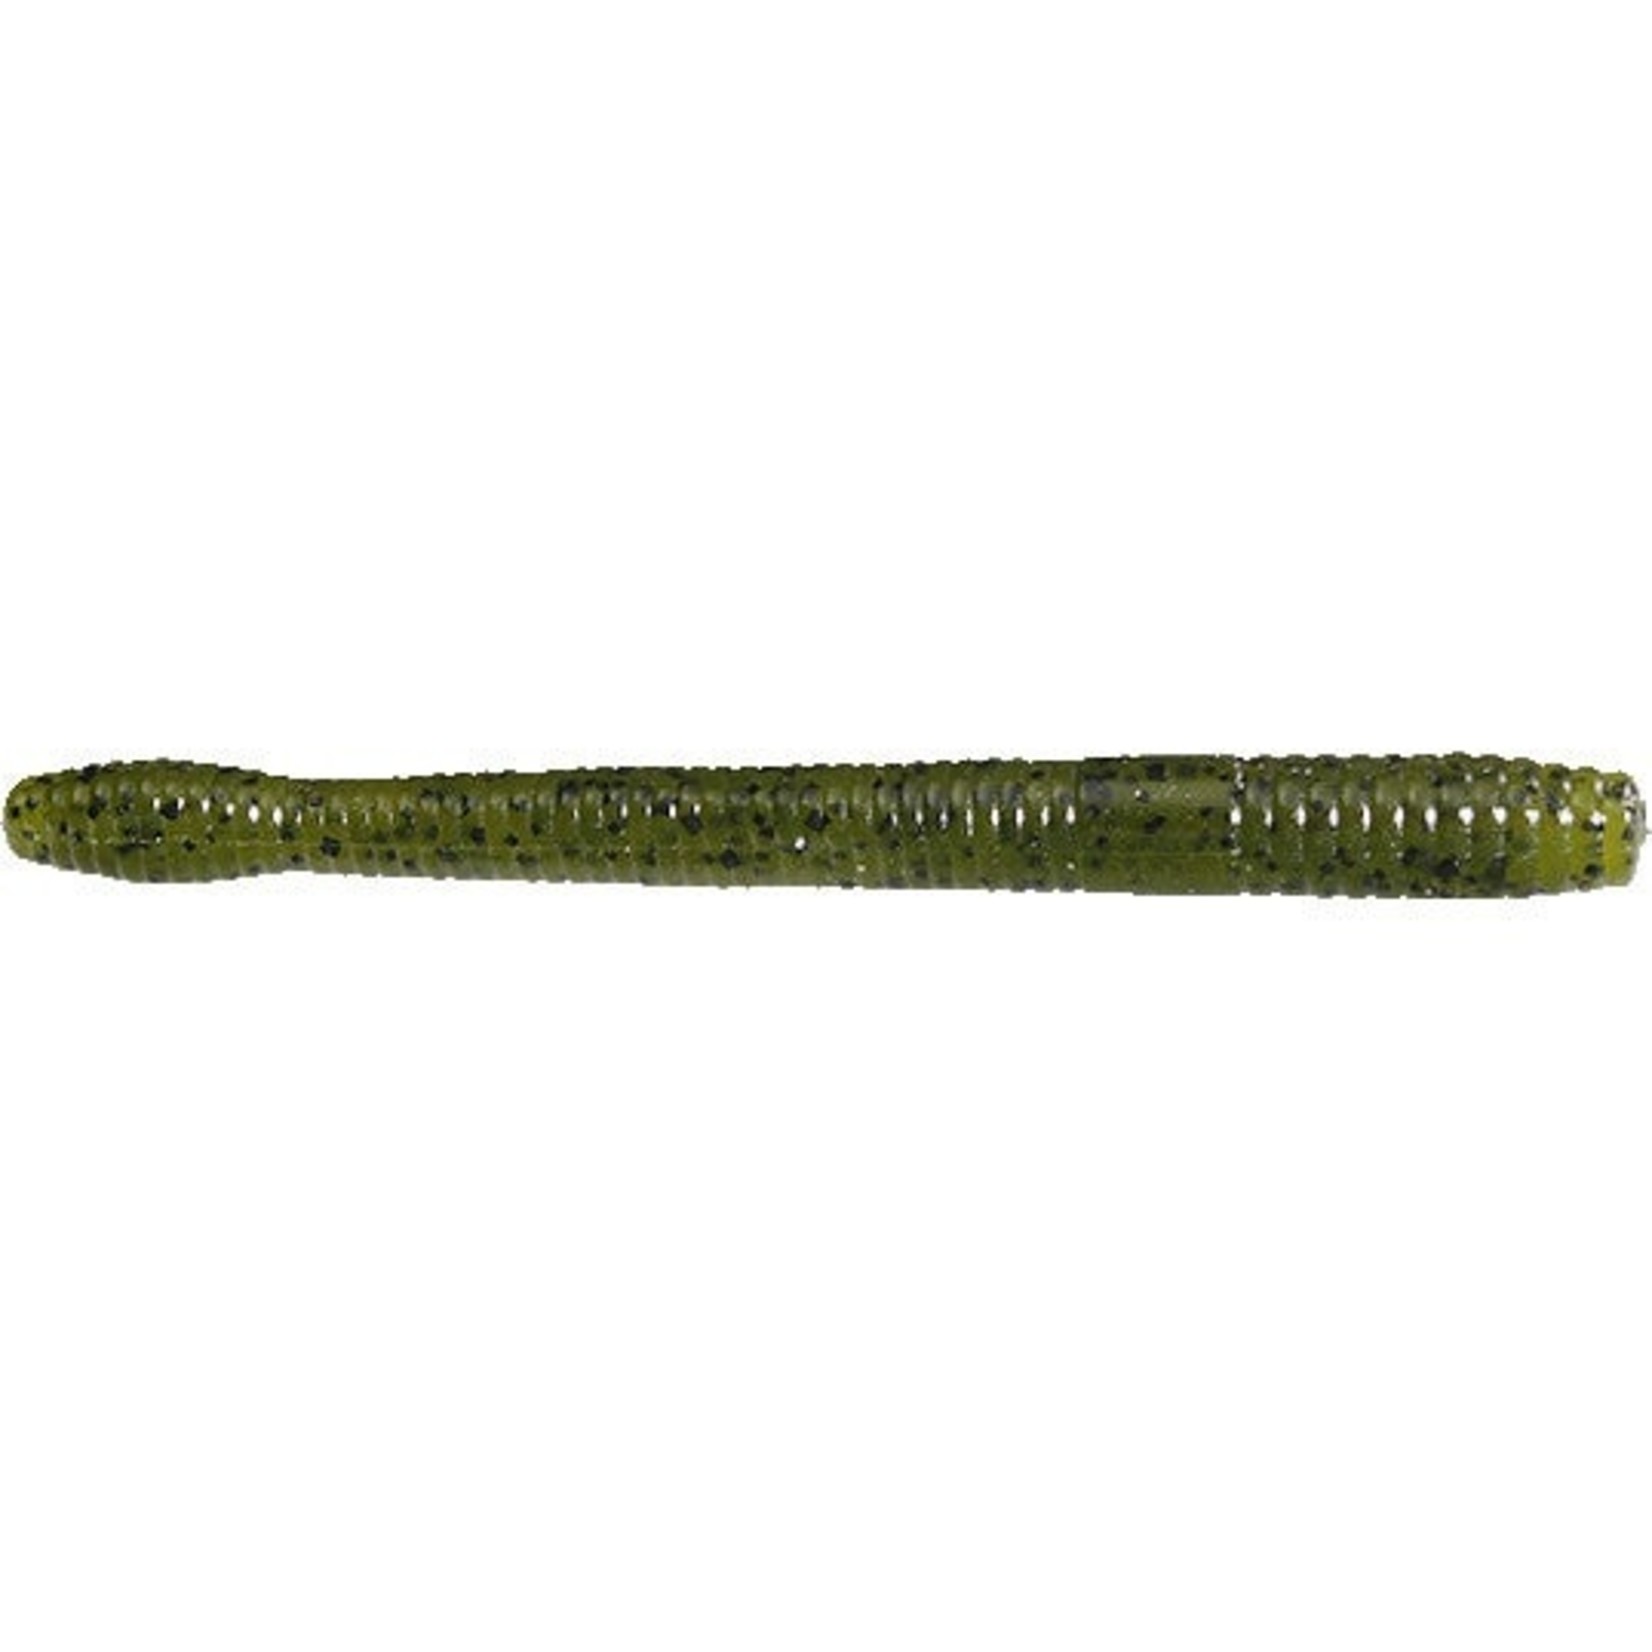 Zoom Zoom Mag Finesse Worm 4" - 10pk